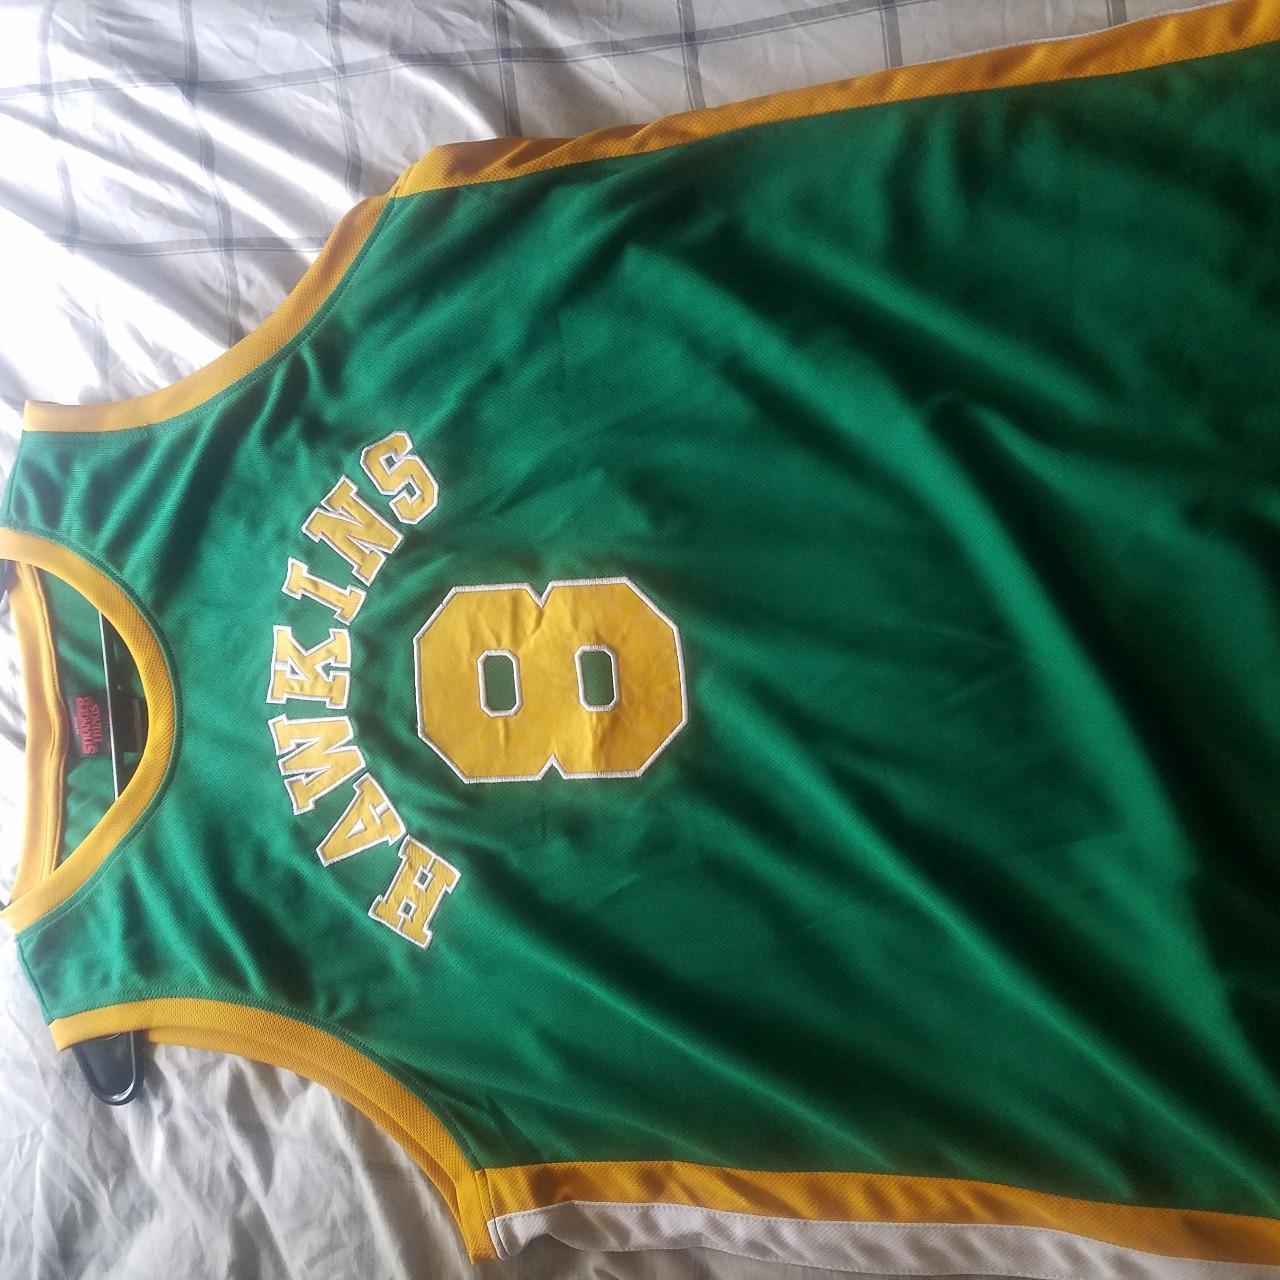 Our Universe Stranger Things Lucas Basketball Jersey